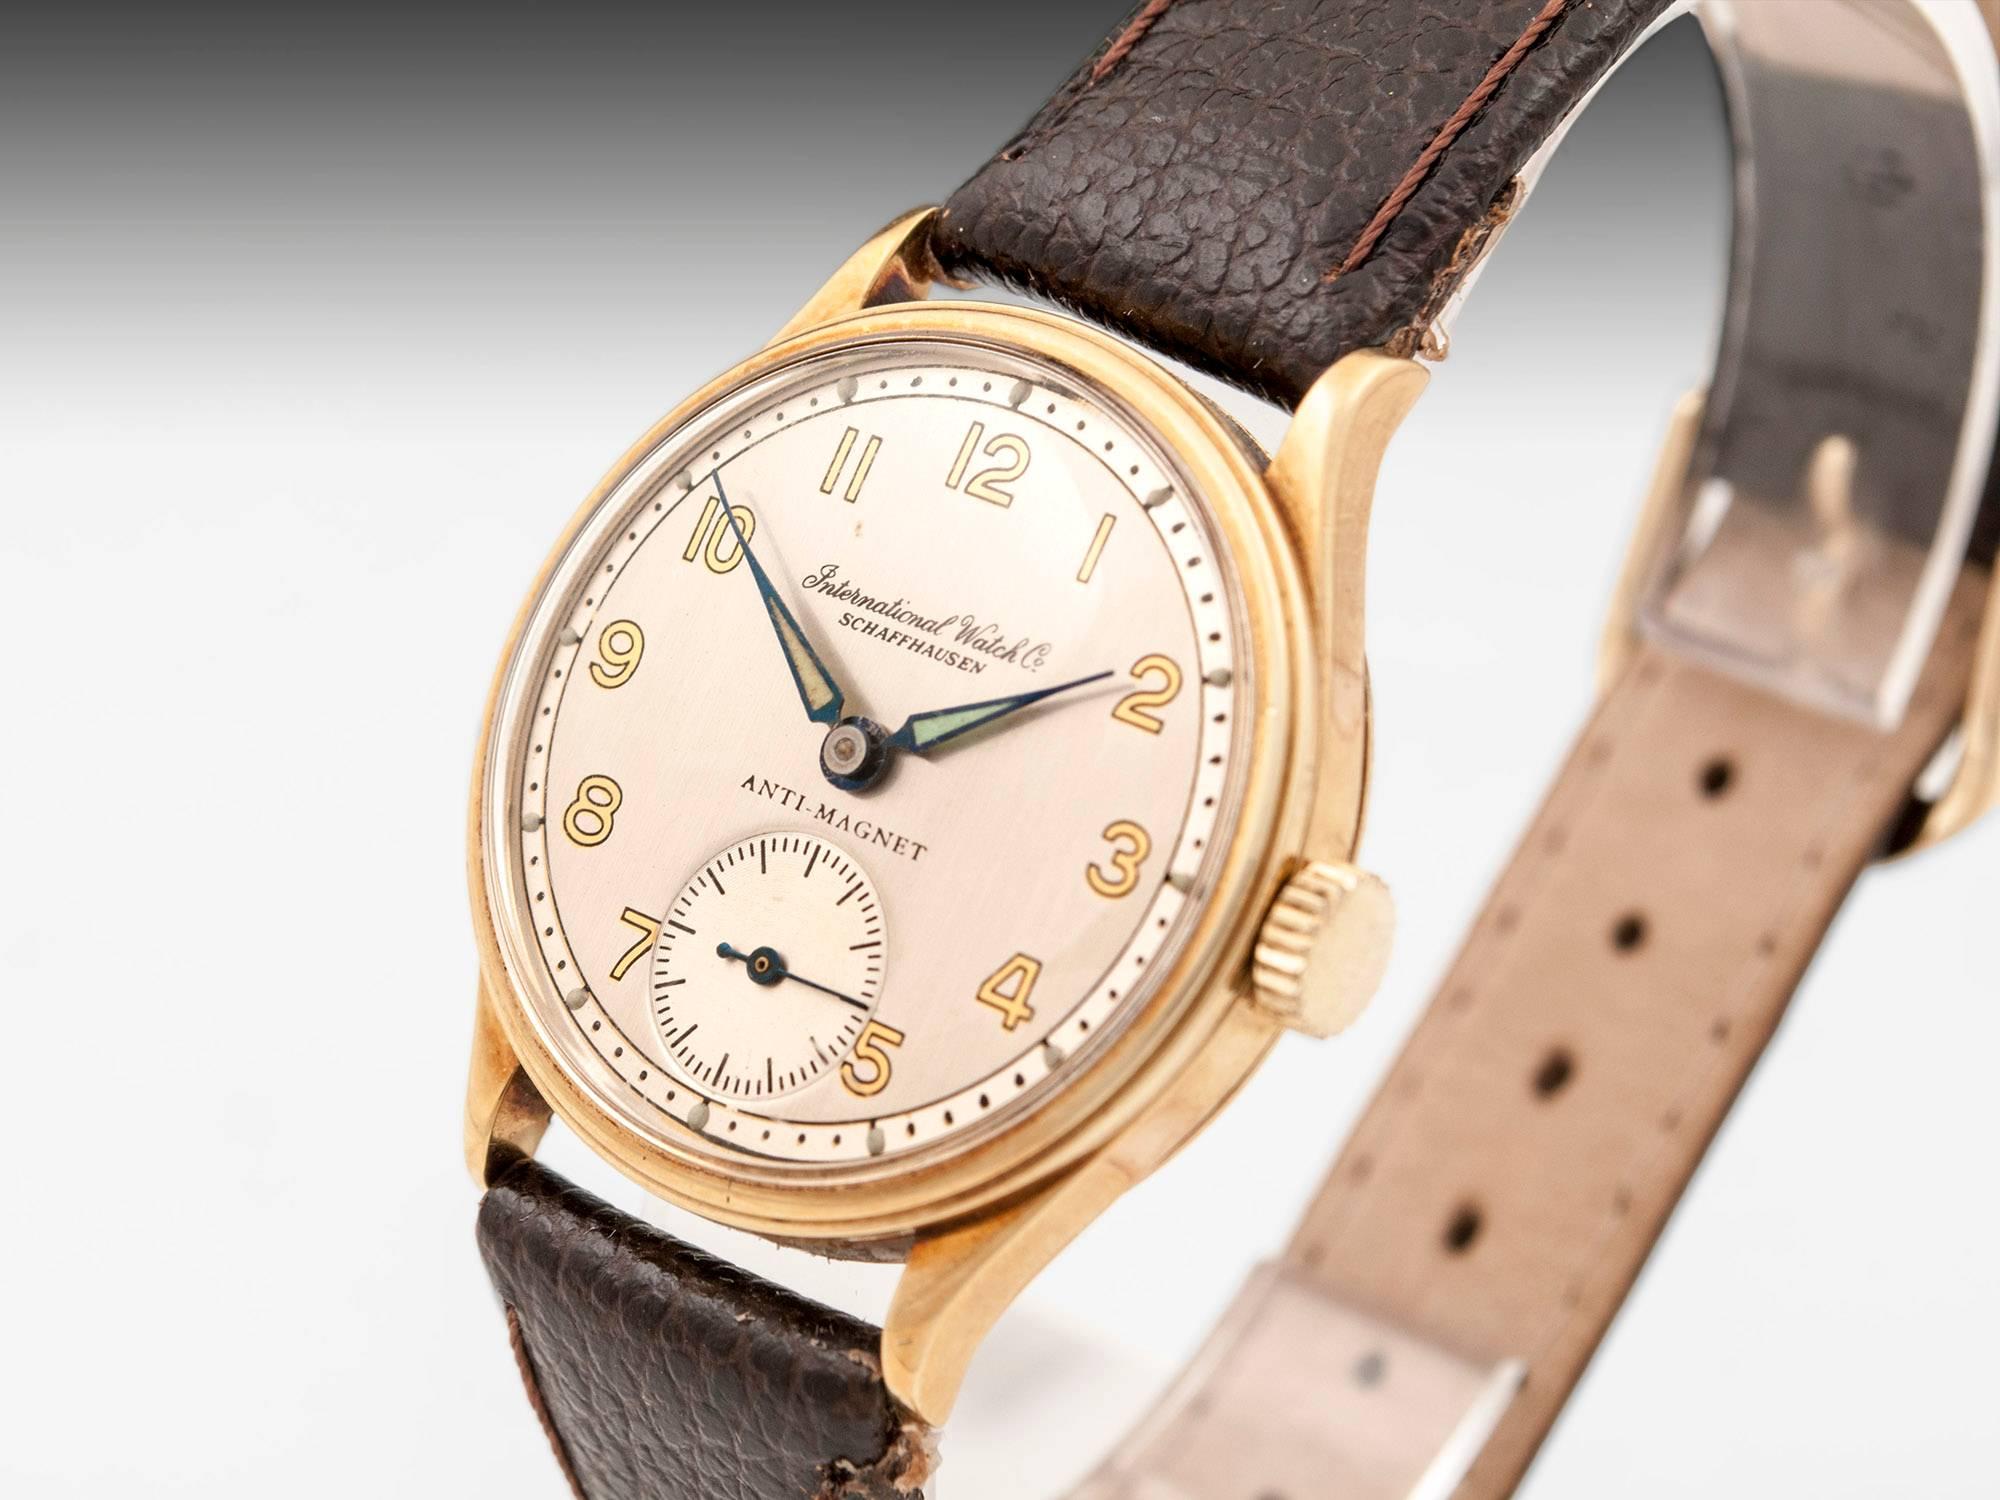 Schaffhausen anti magnetic 14-carat gold wristwatch watch. With manual movement. Inside the casing is marked: “14k 0.585” 